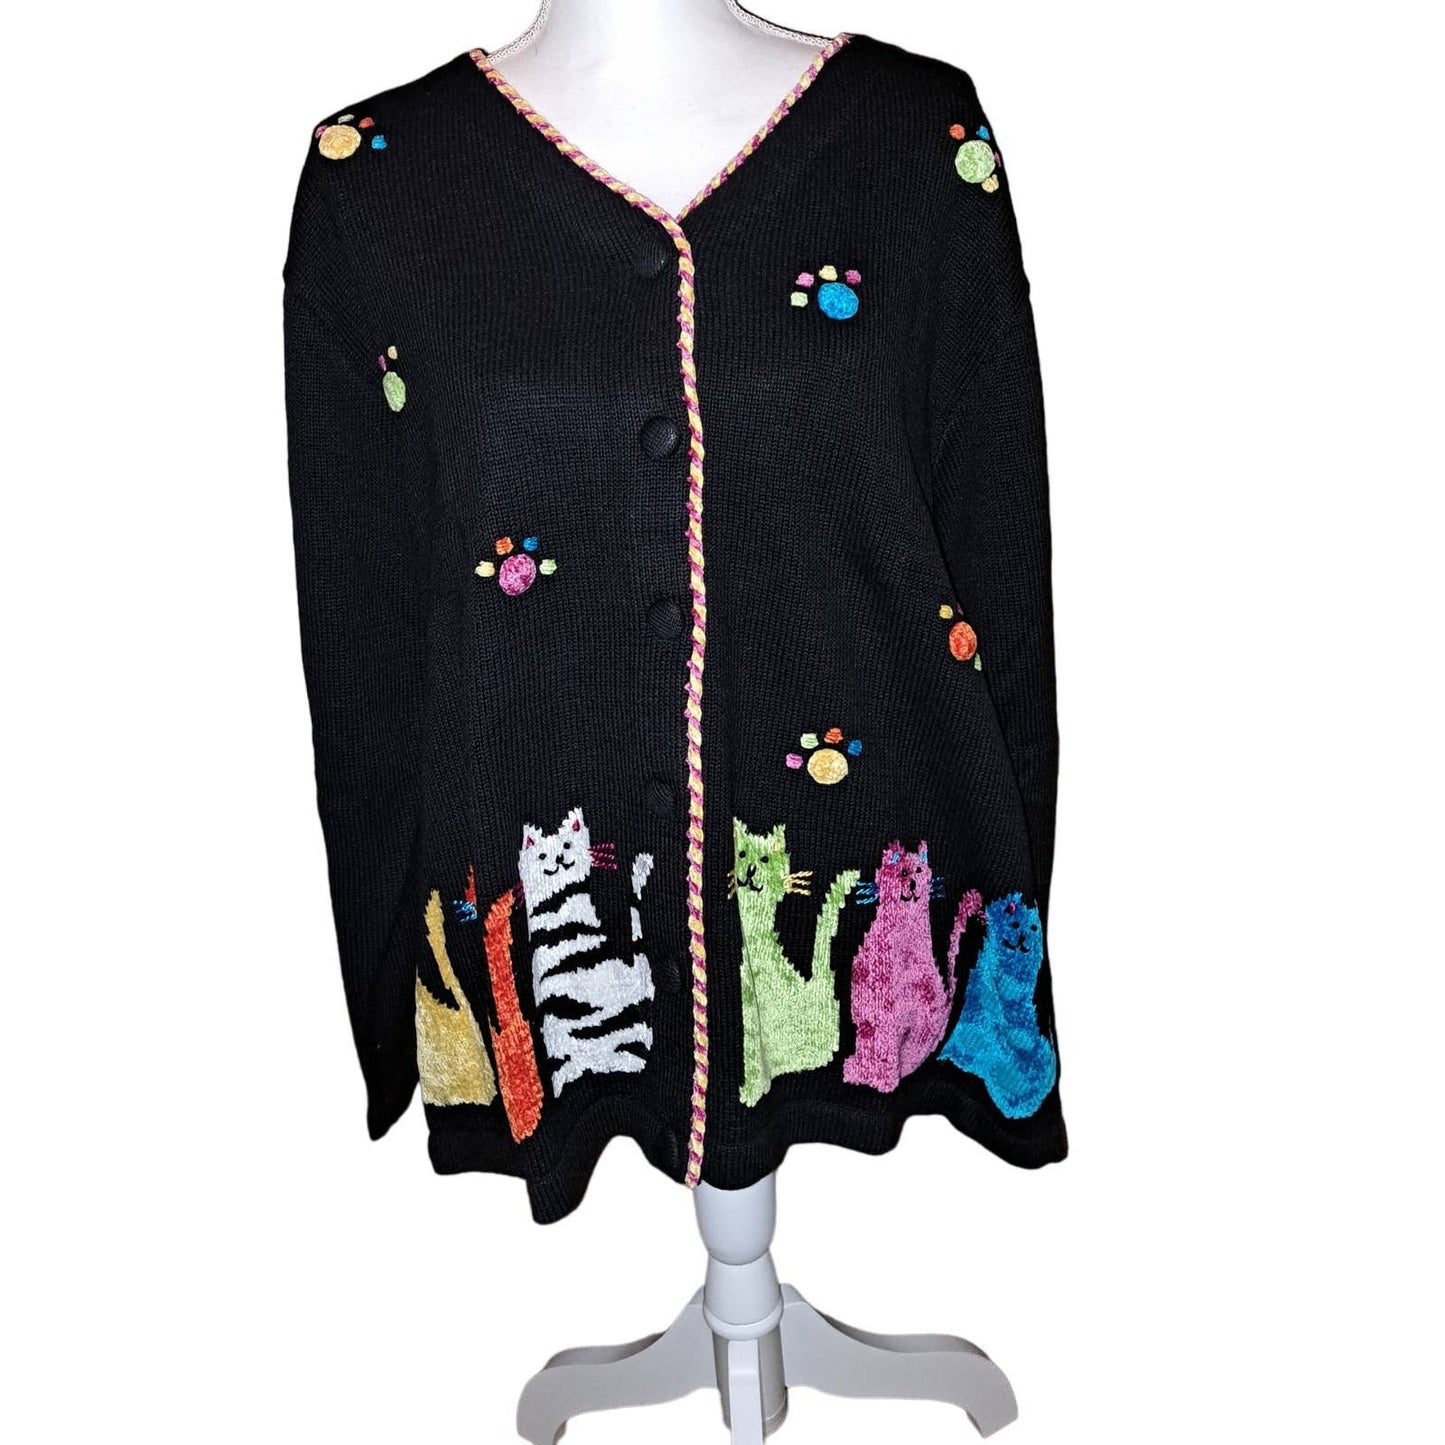 NWT-Quacker Factory Black Button Cardigan Embroidered Cats 1X